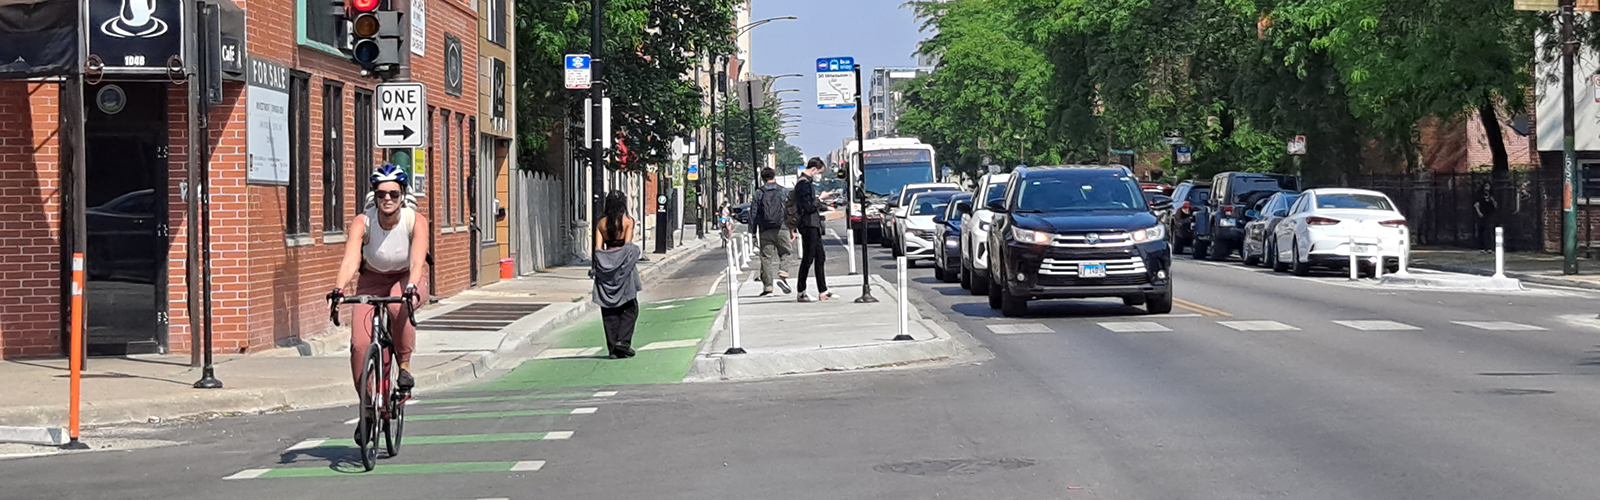 View of street with person riding bicycle toward viewer in curbside green-painted bike lane separated from vehicle travel lane by concrete bus median. Group of people standing waiting for bus on concrete median.